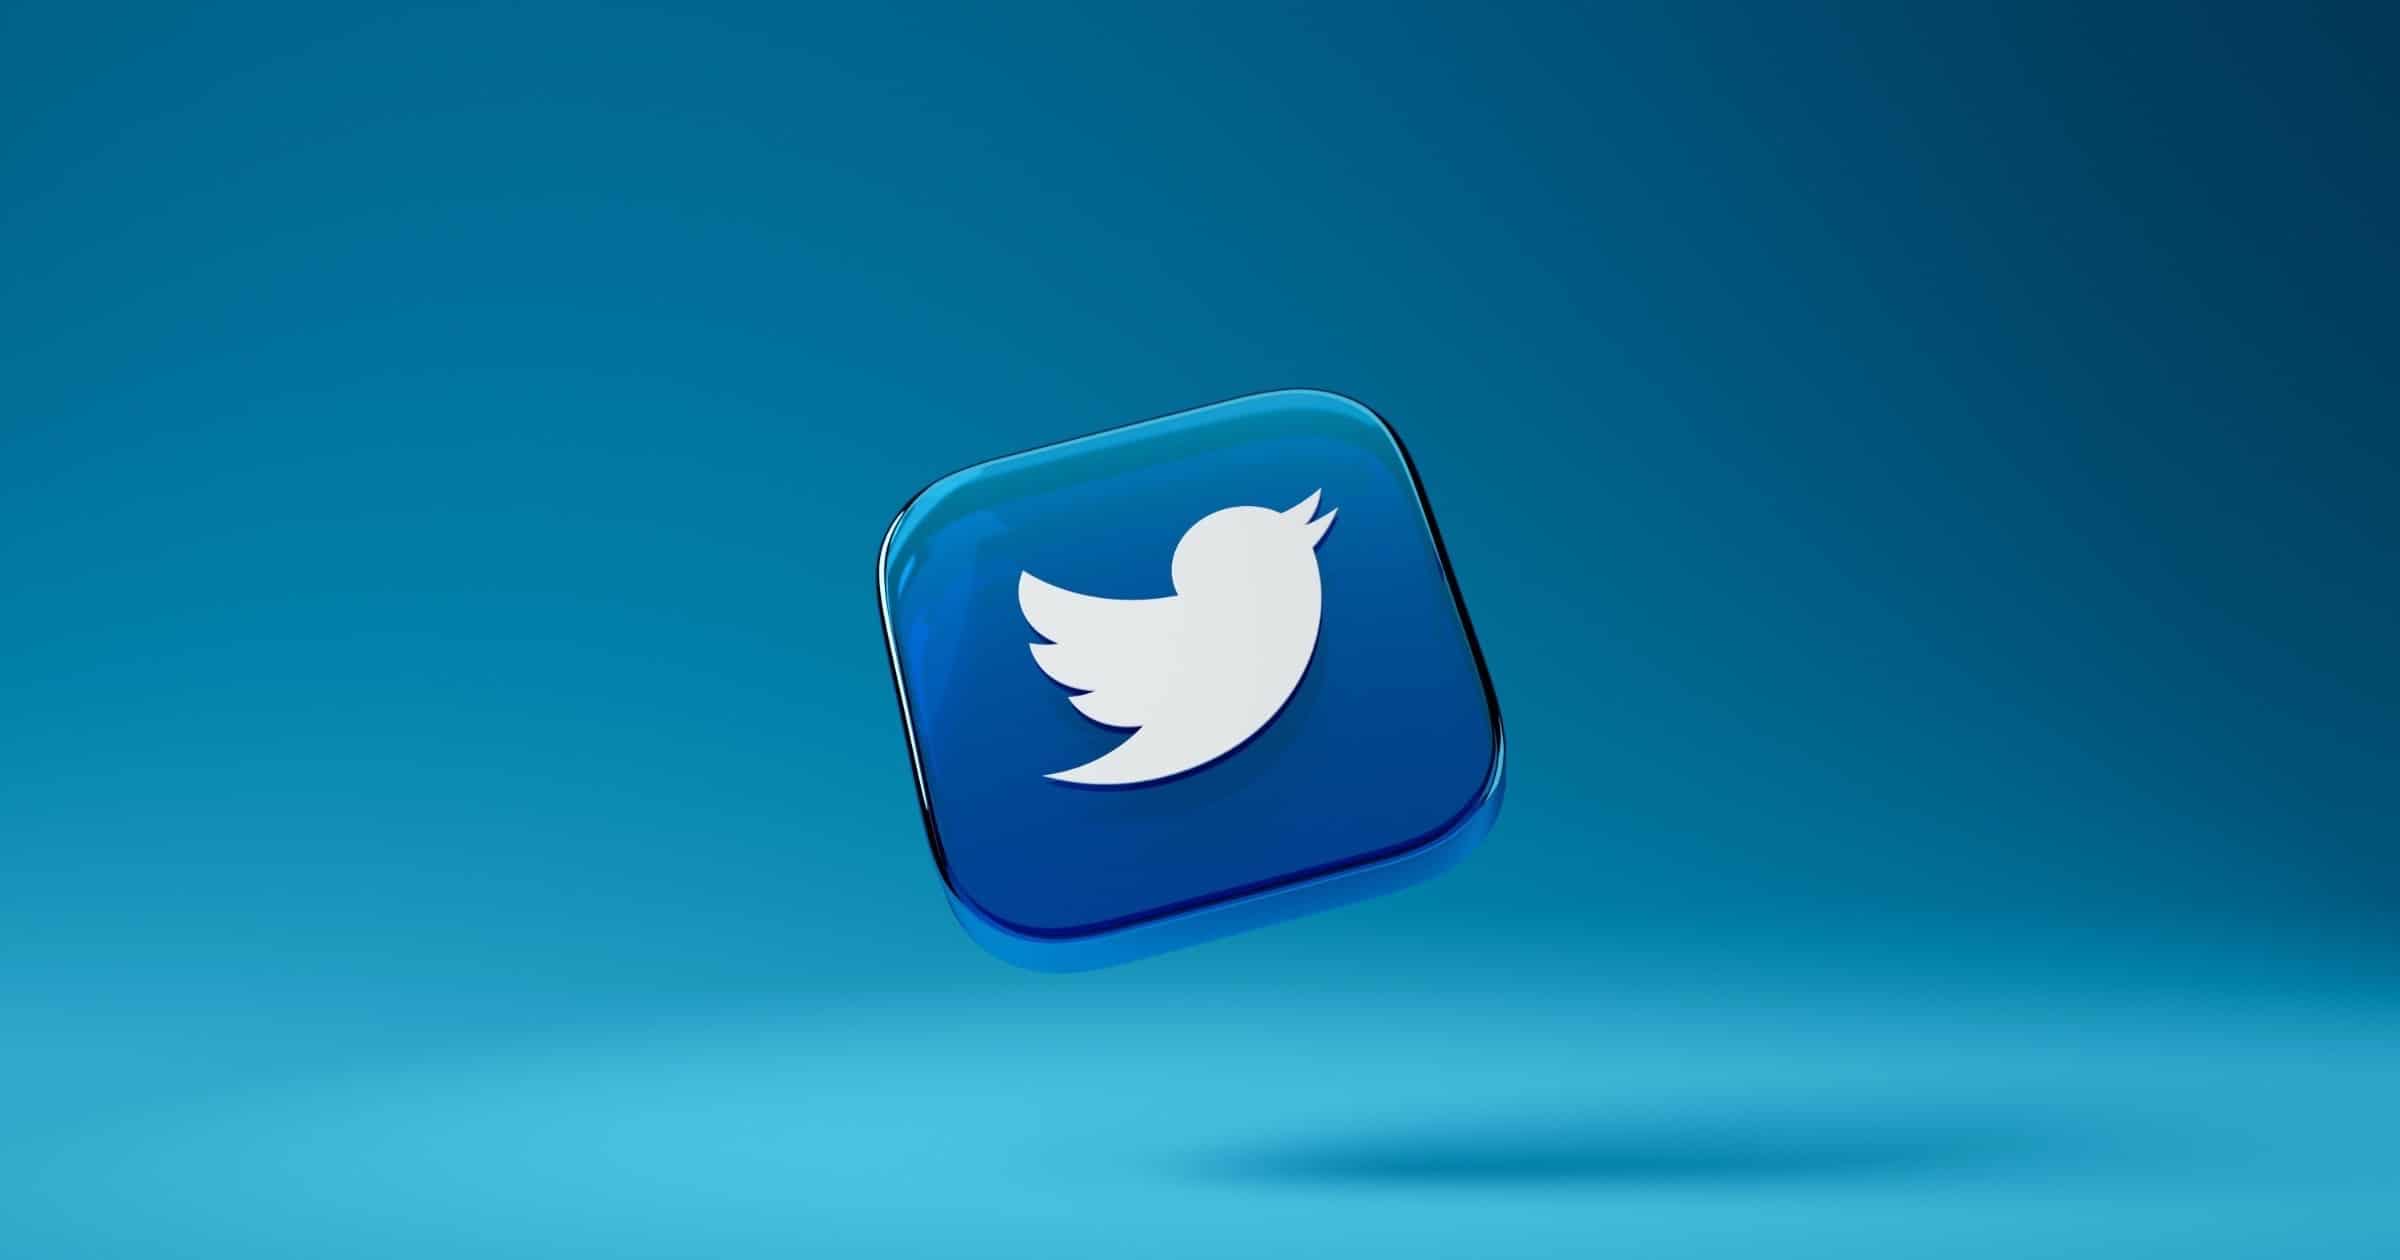 Twitter Blue on iOS Relaunches on Monday for $11 Monthly